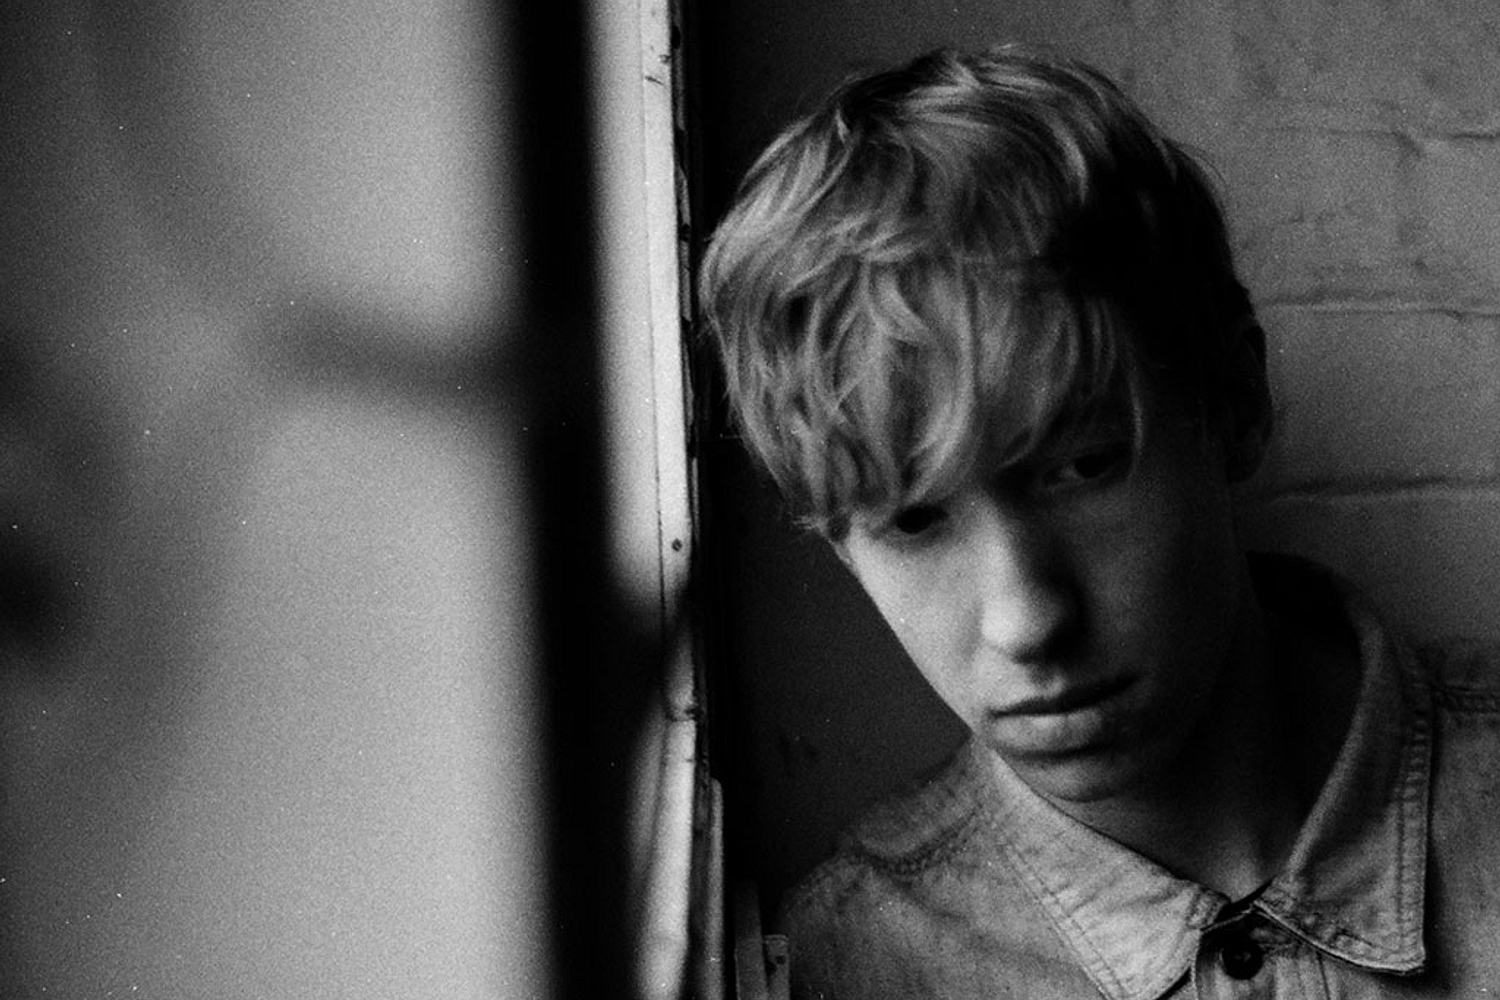 Daniel Avery releases new EP ‘More Truth’